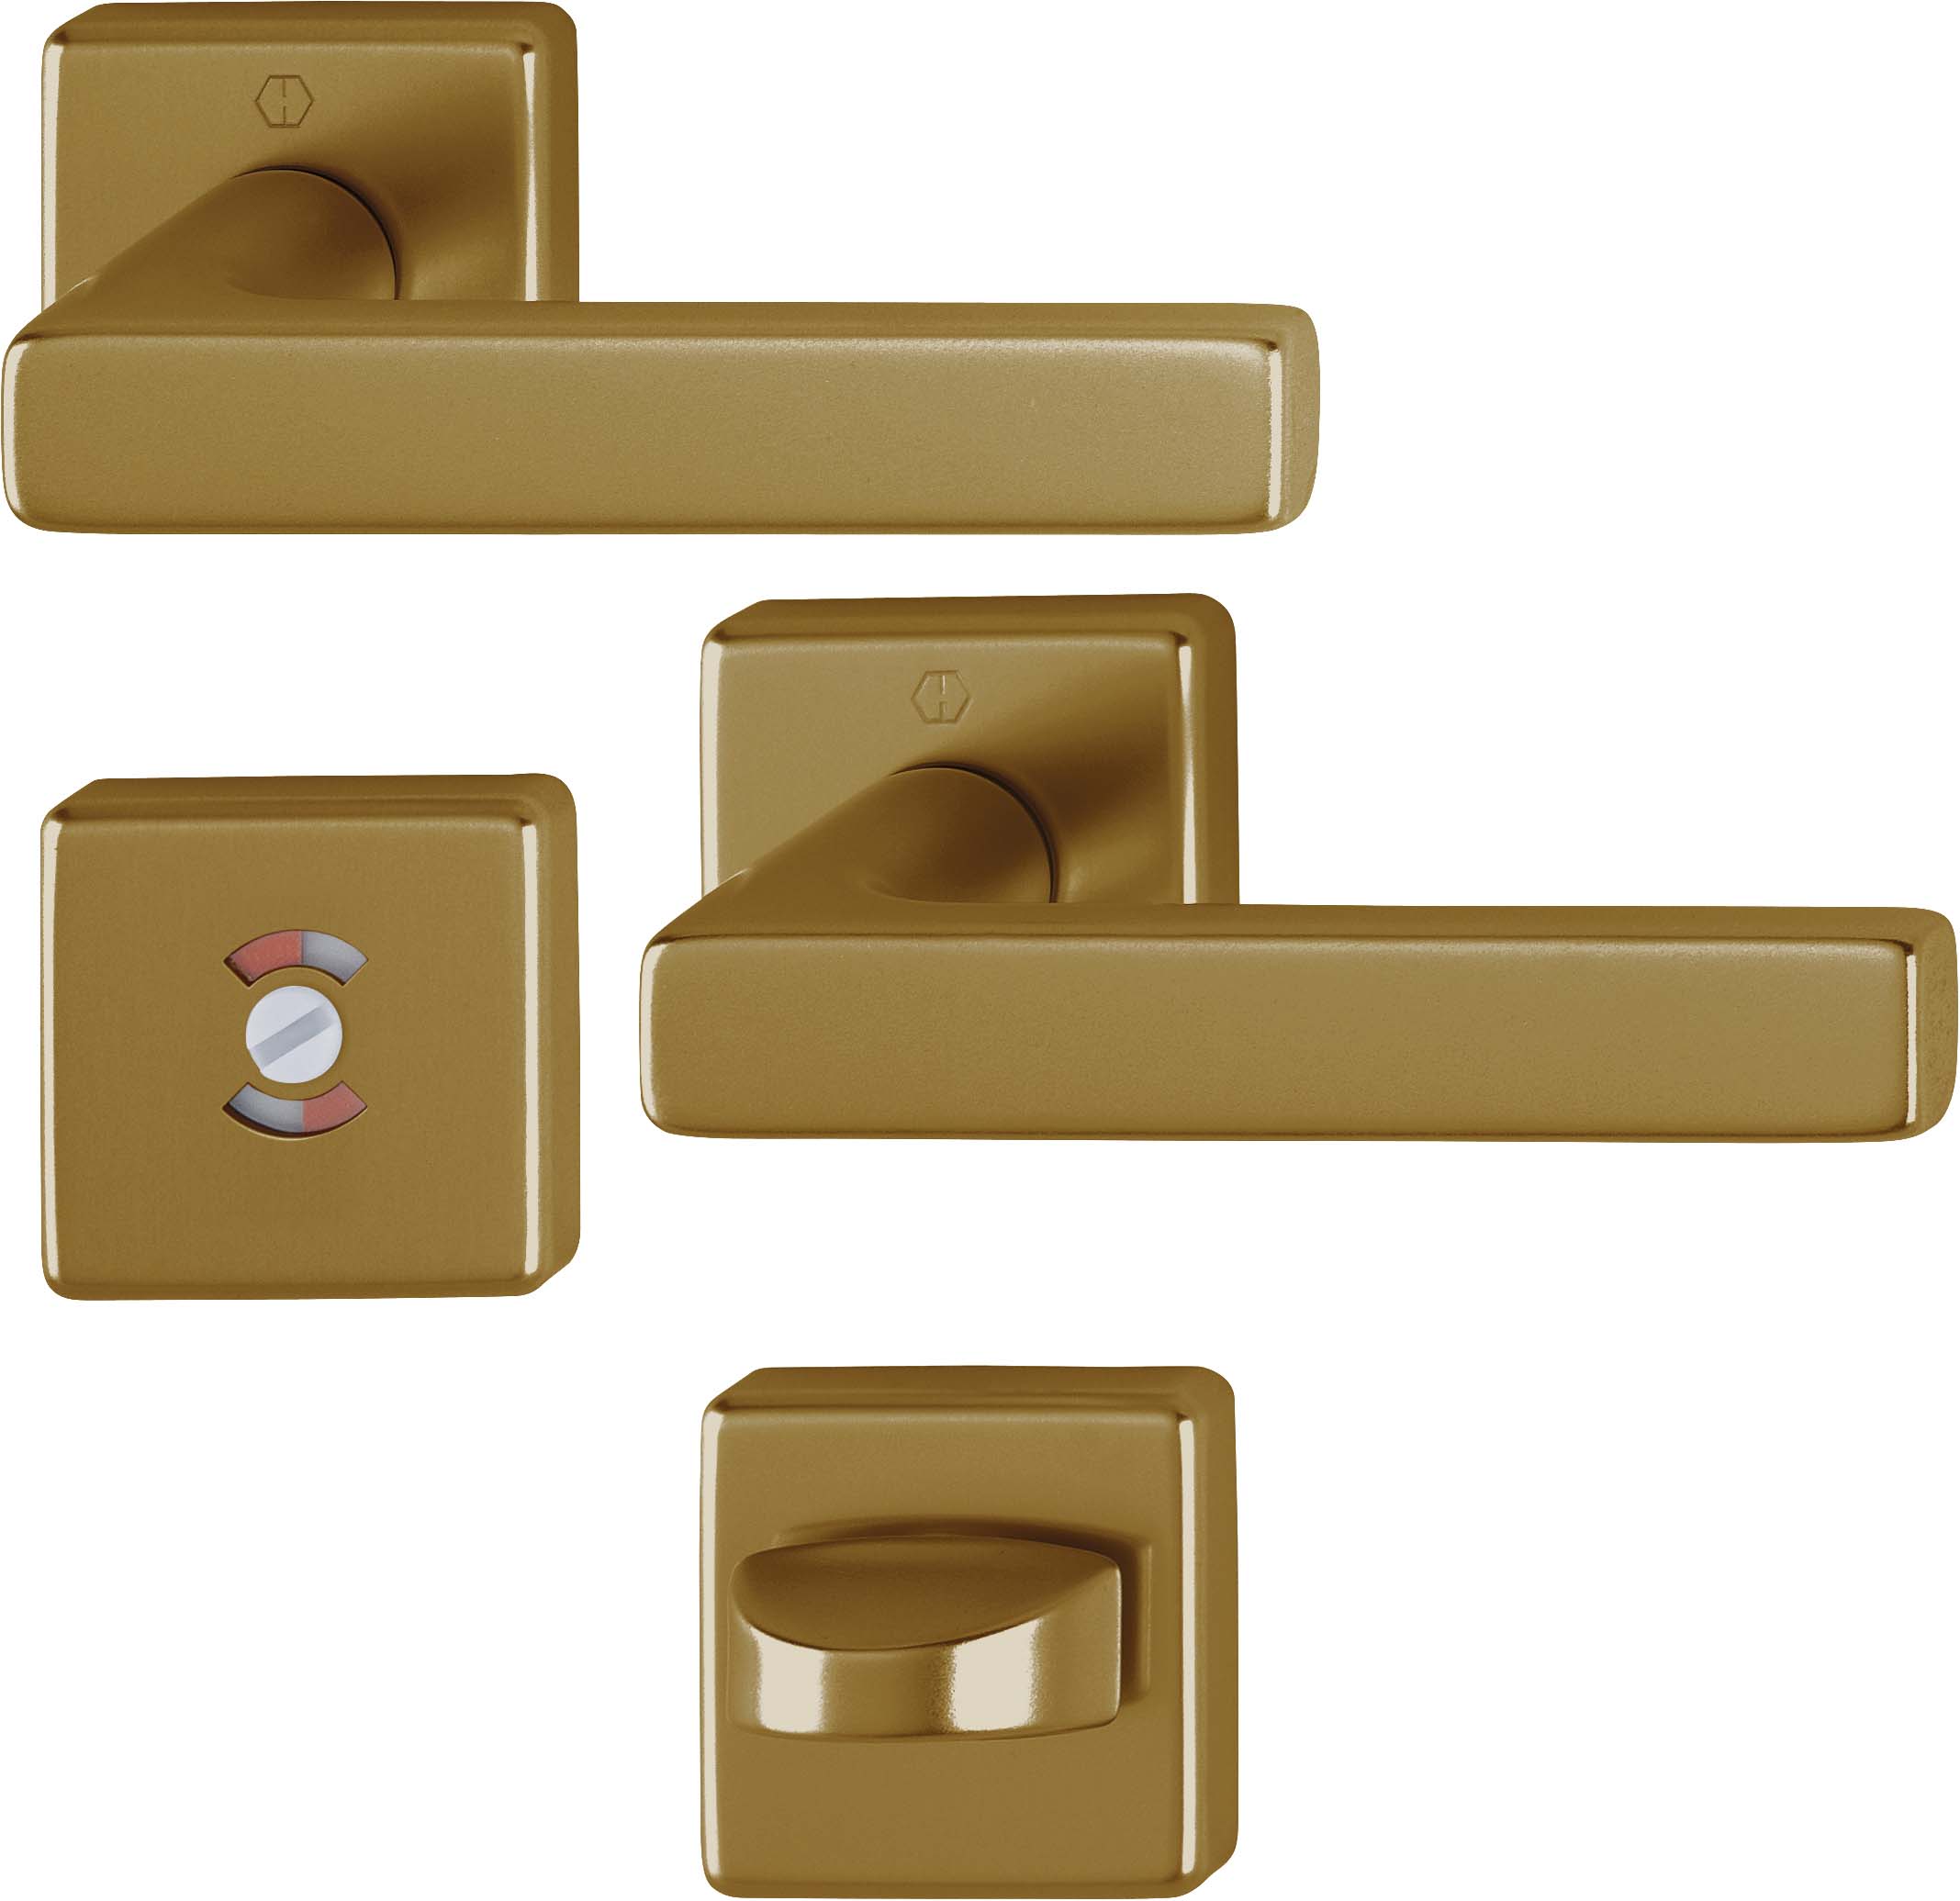 Handle-Dallas-bronze-nuance-with-wc-lock